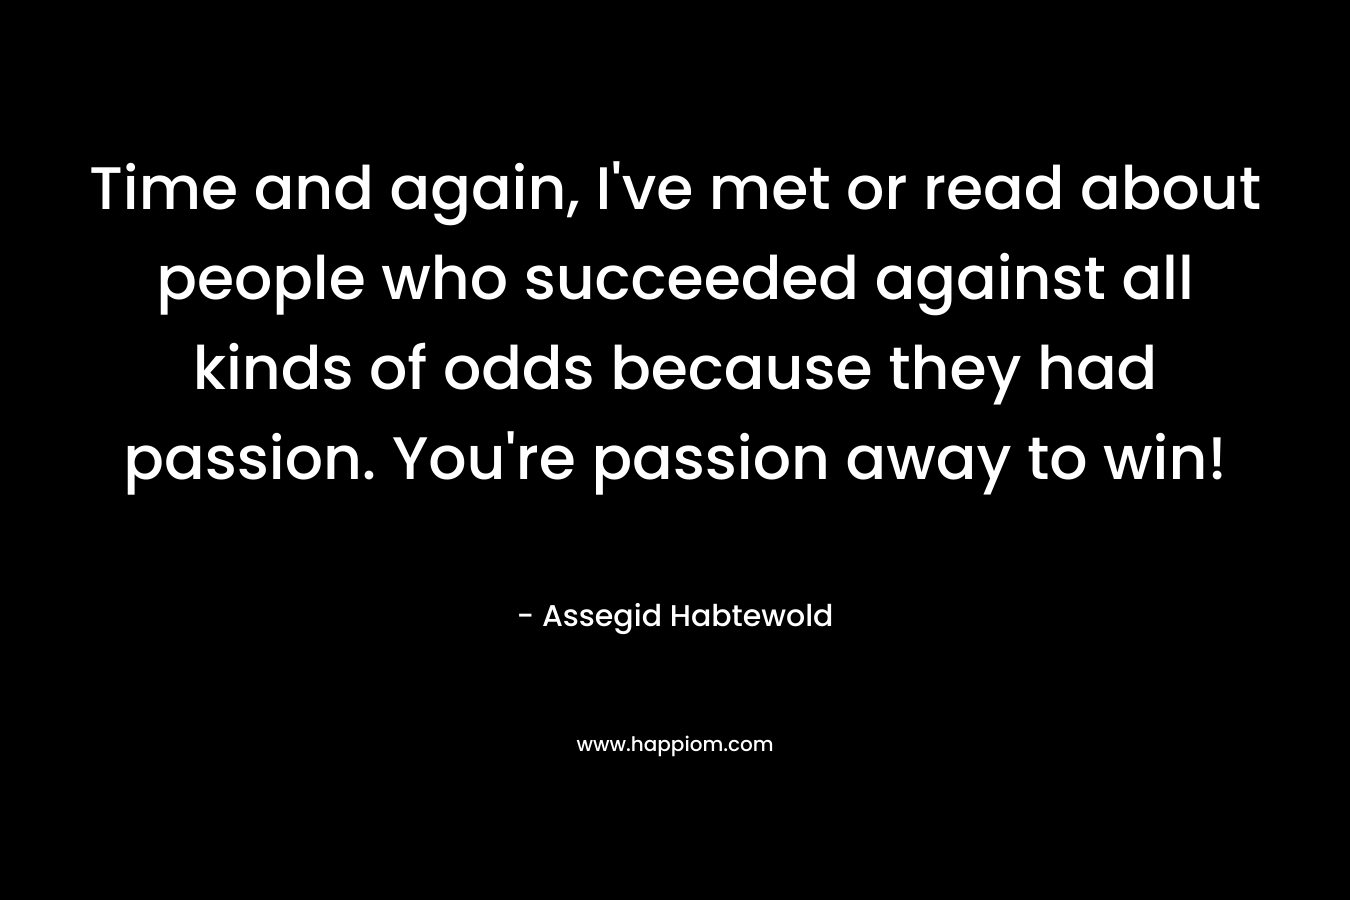 Time and again, I've met or read about people who succeeded against all kinds of odds because they had passion. You're passion away to win!